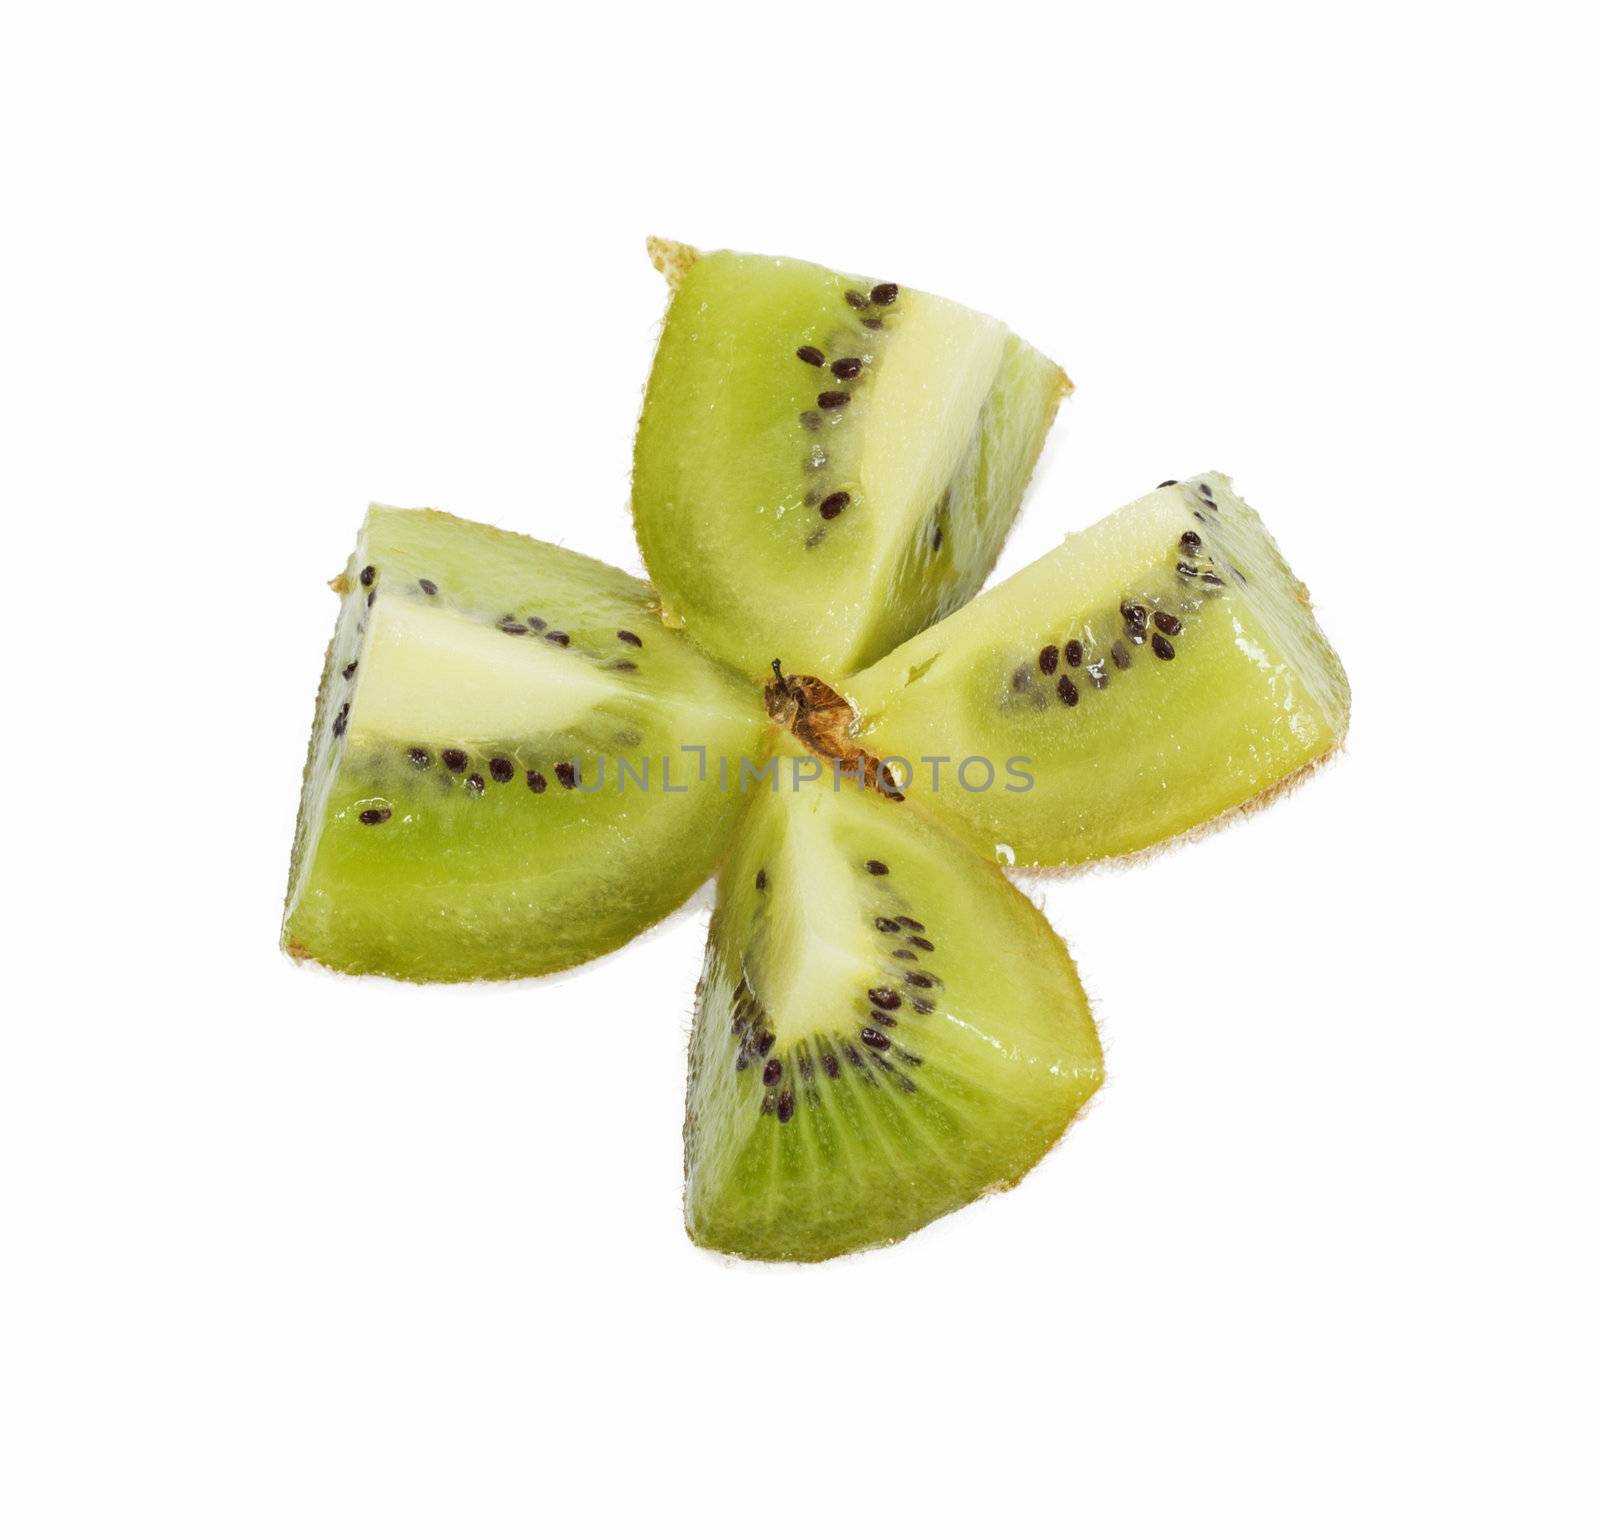 A kiwi fruit sliced open so the seeds are visible  by schankz